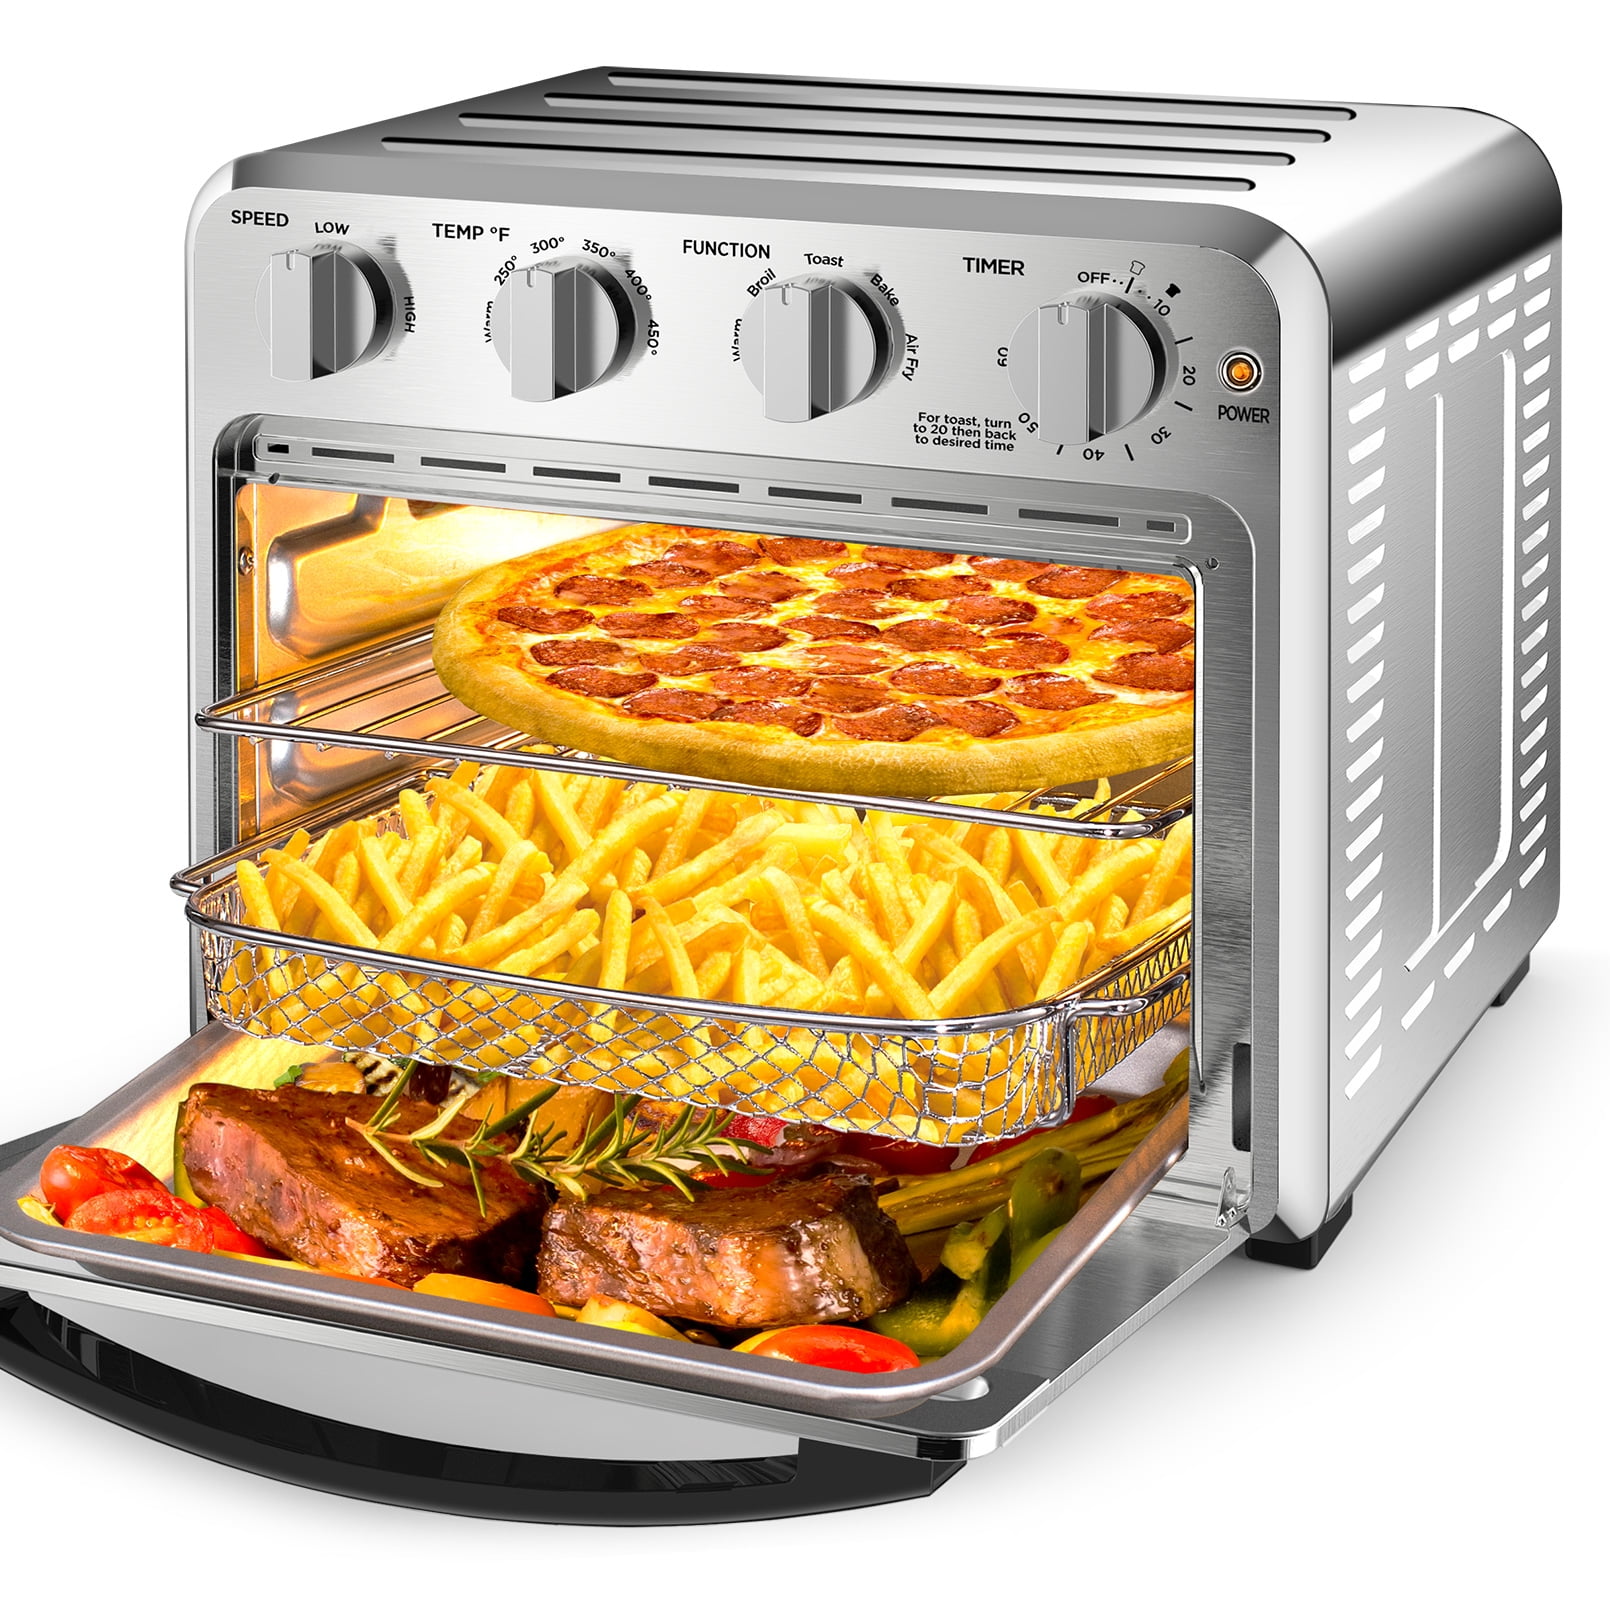 Toaster Oven Air Fryer Combo, AUMATE Kitchen in the box Countertop  Convection Oven, Airfryer,Knob Control Pizza Oven with Timer/Auto-Off, 4